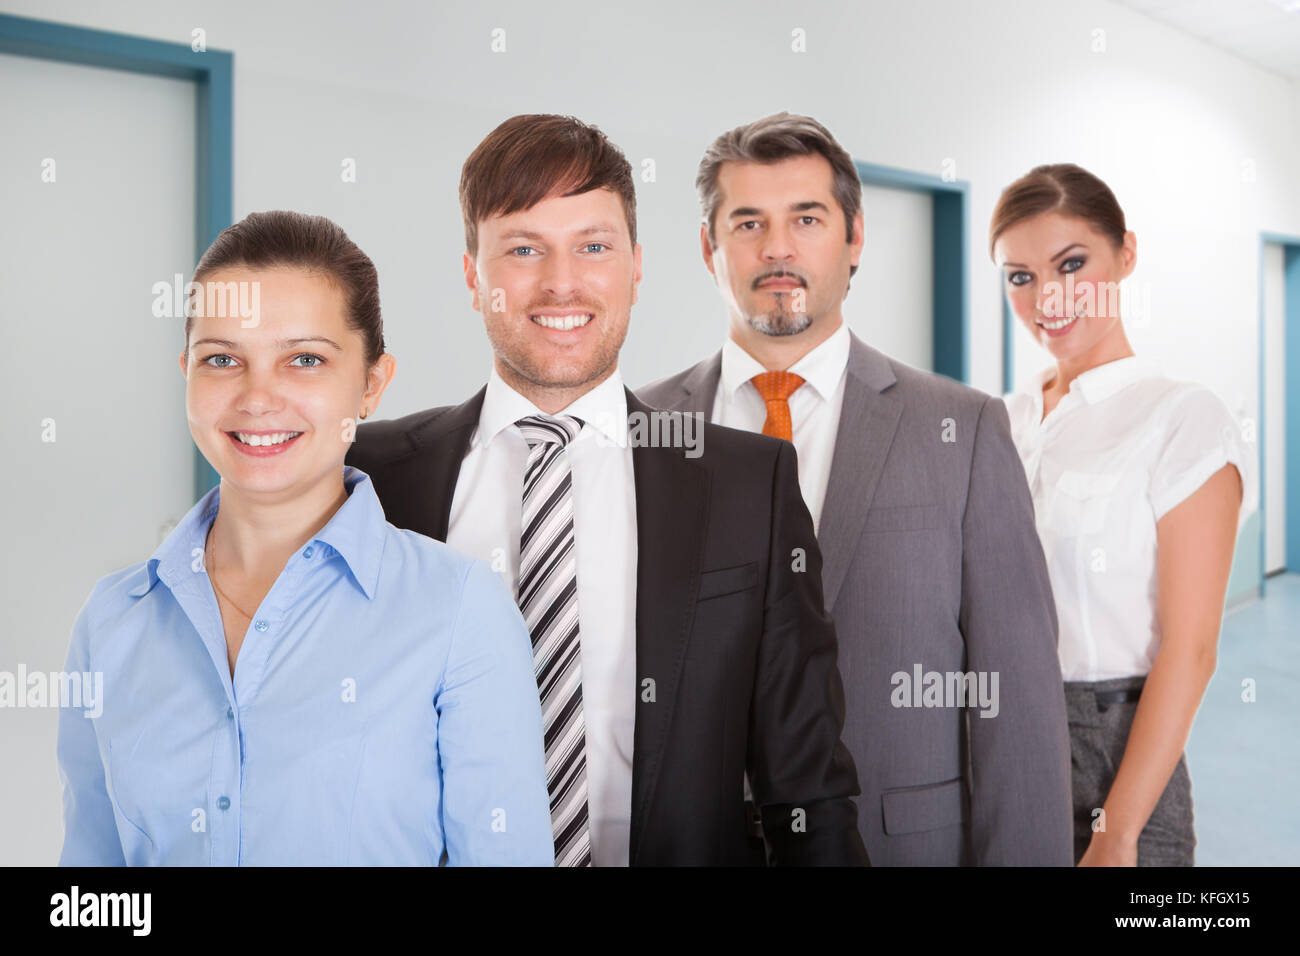 Portrait of confident businesspeople standing together in office Stock Photo